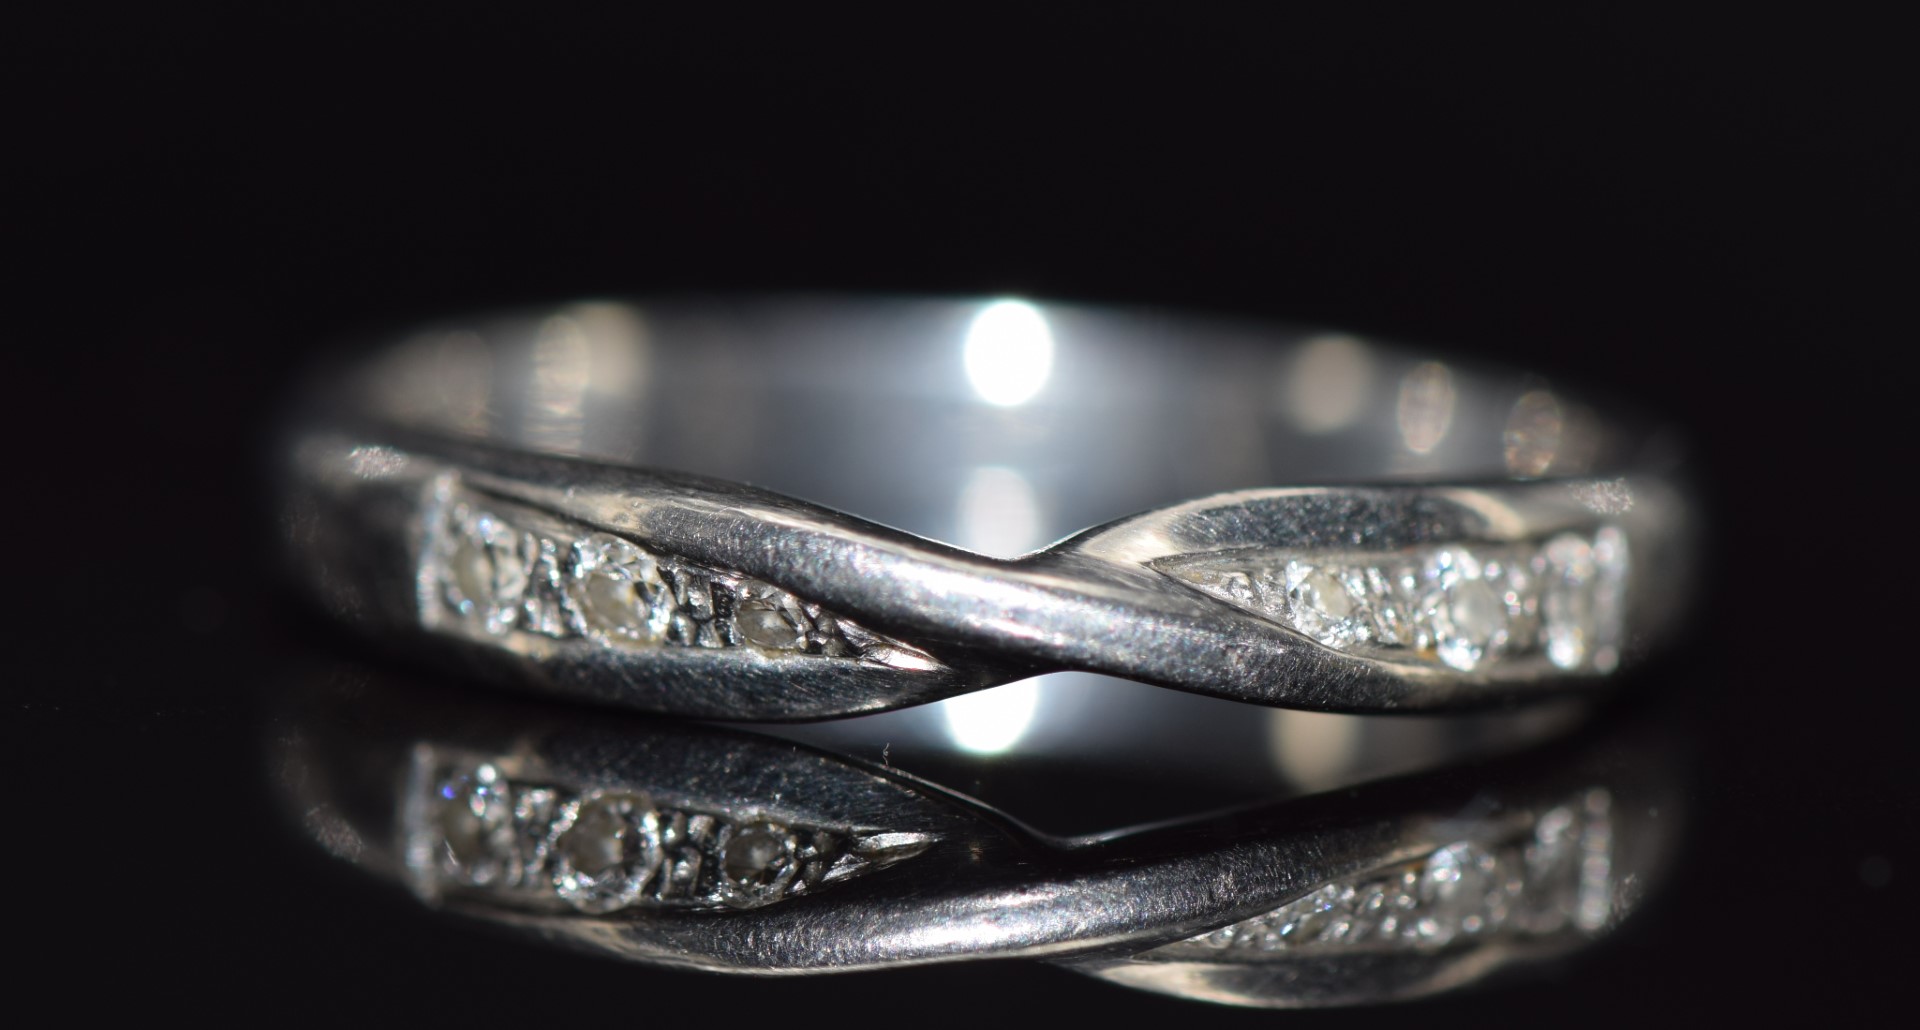 A platinum wedding band / ring with twisted design to fit engagement ring set with six round